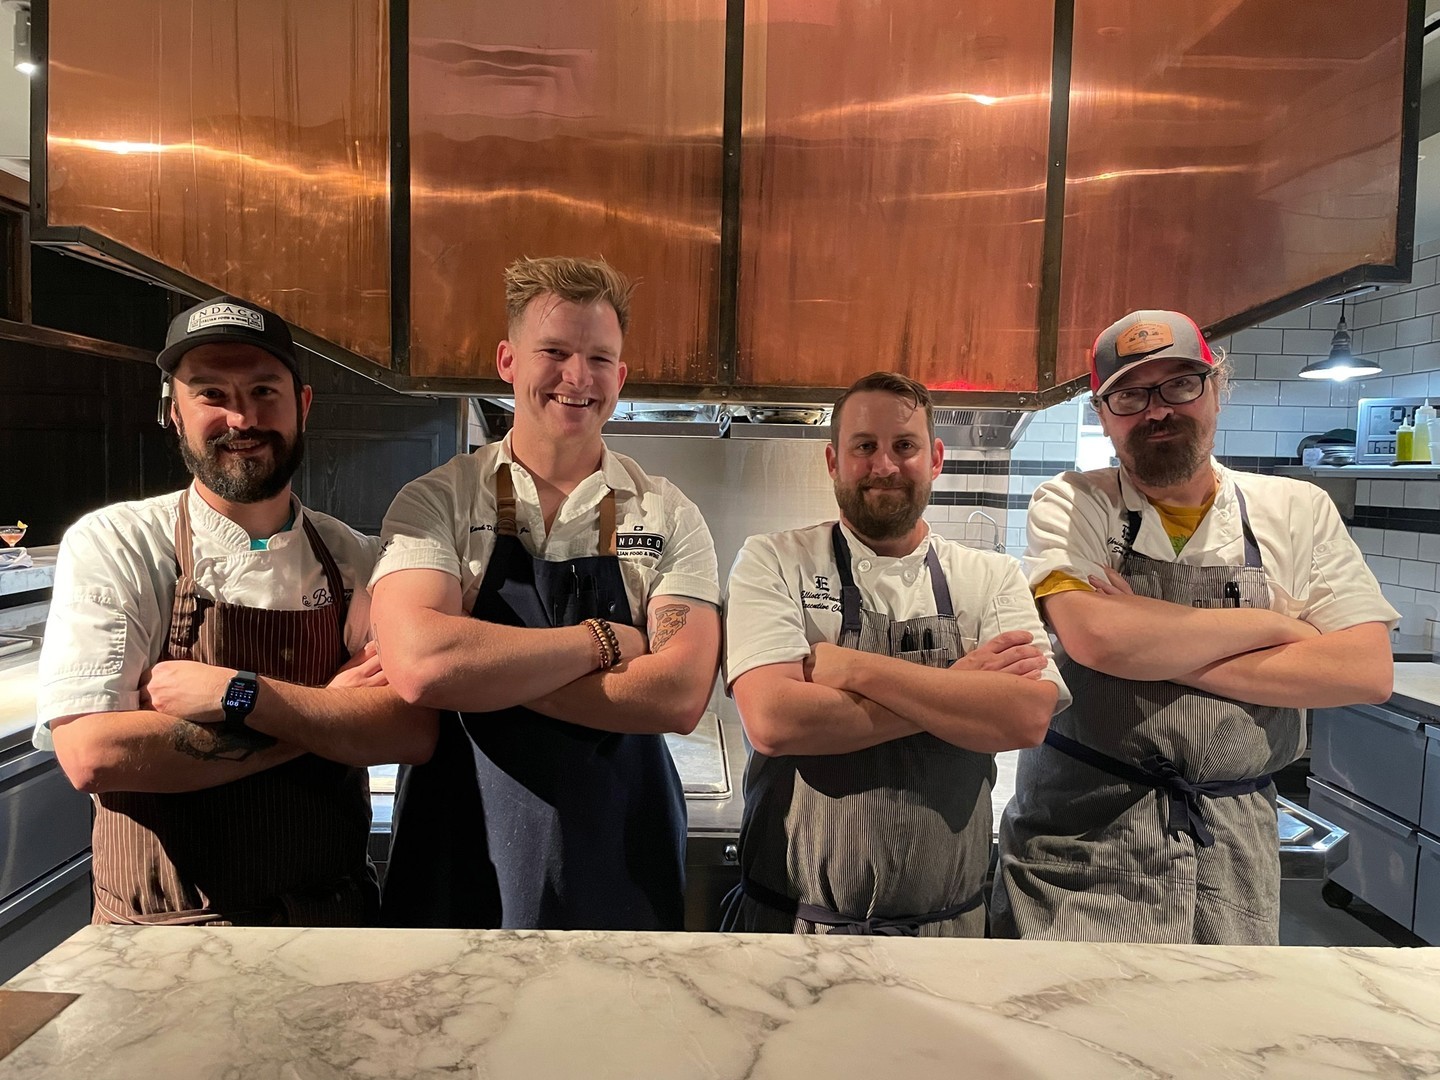 A special thanks to our friends at Indaco who helped us raise another $10k for Charleston charities. Our second 'Give Back Charleston' dinner with guest chef Mark Bolchoz was in support of One80 Place. Visit one80place.org to find out how you can further support this incredible organization.⁠
.⁠
.⁠
.⁠
#giveback #givebackcharleston #chseats #charleston #one80place #endhomelessness #feedthehomeless⁠